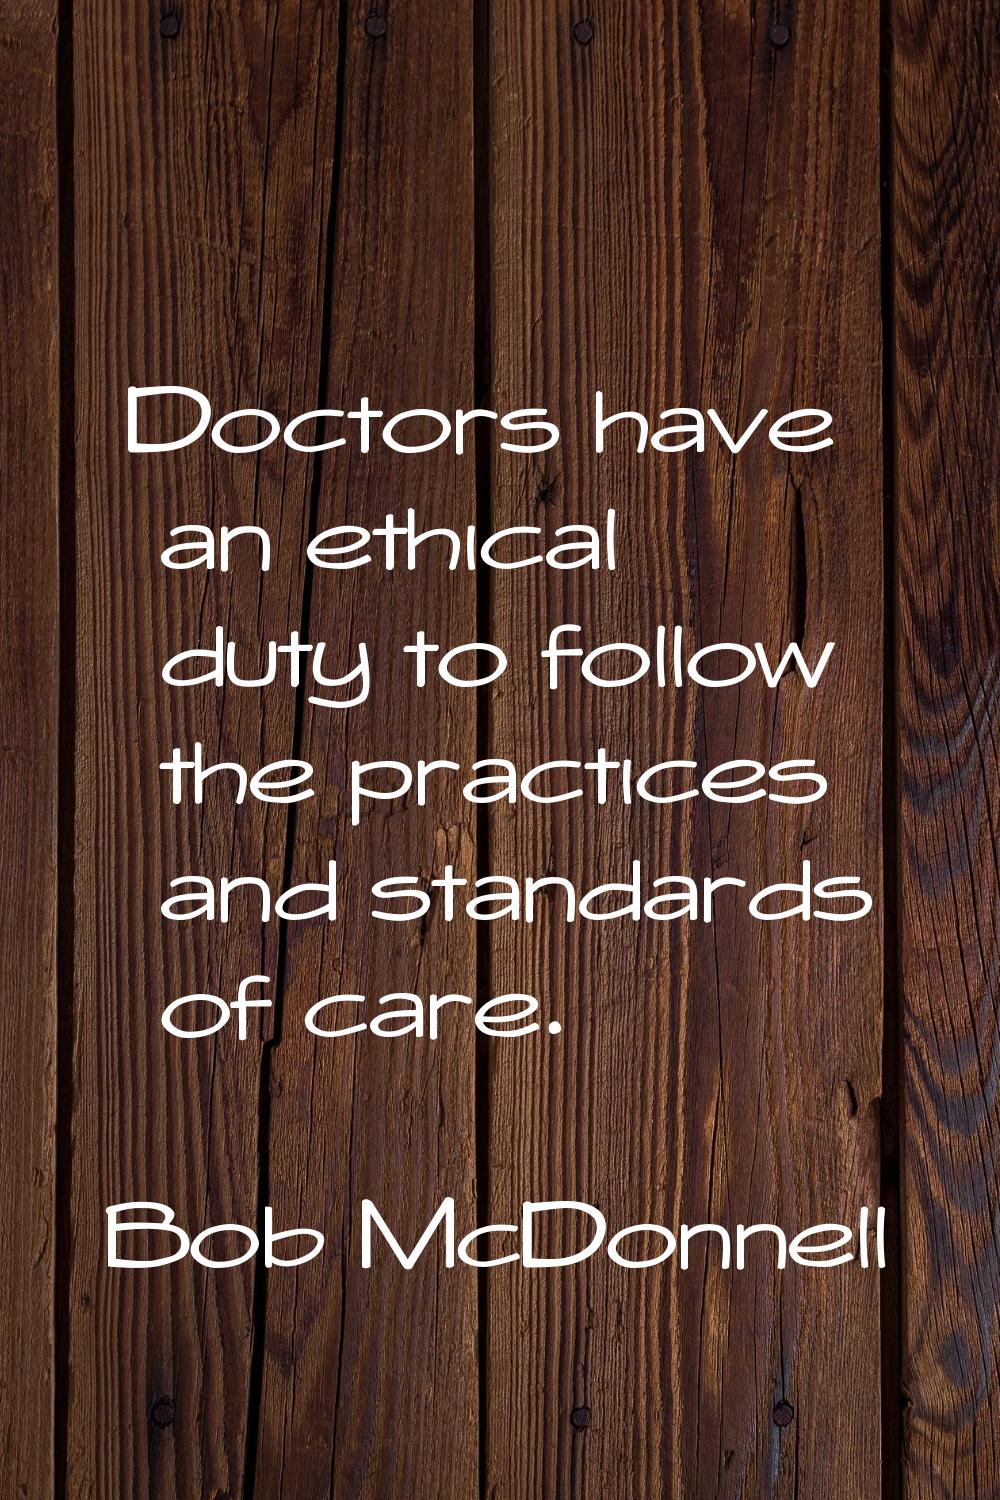 Doctors have an ethical duty to follow the practices and standards of care.